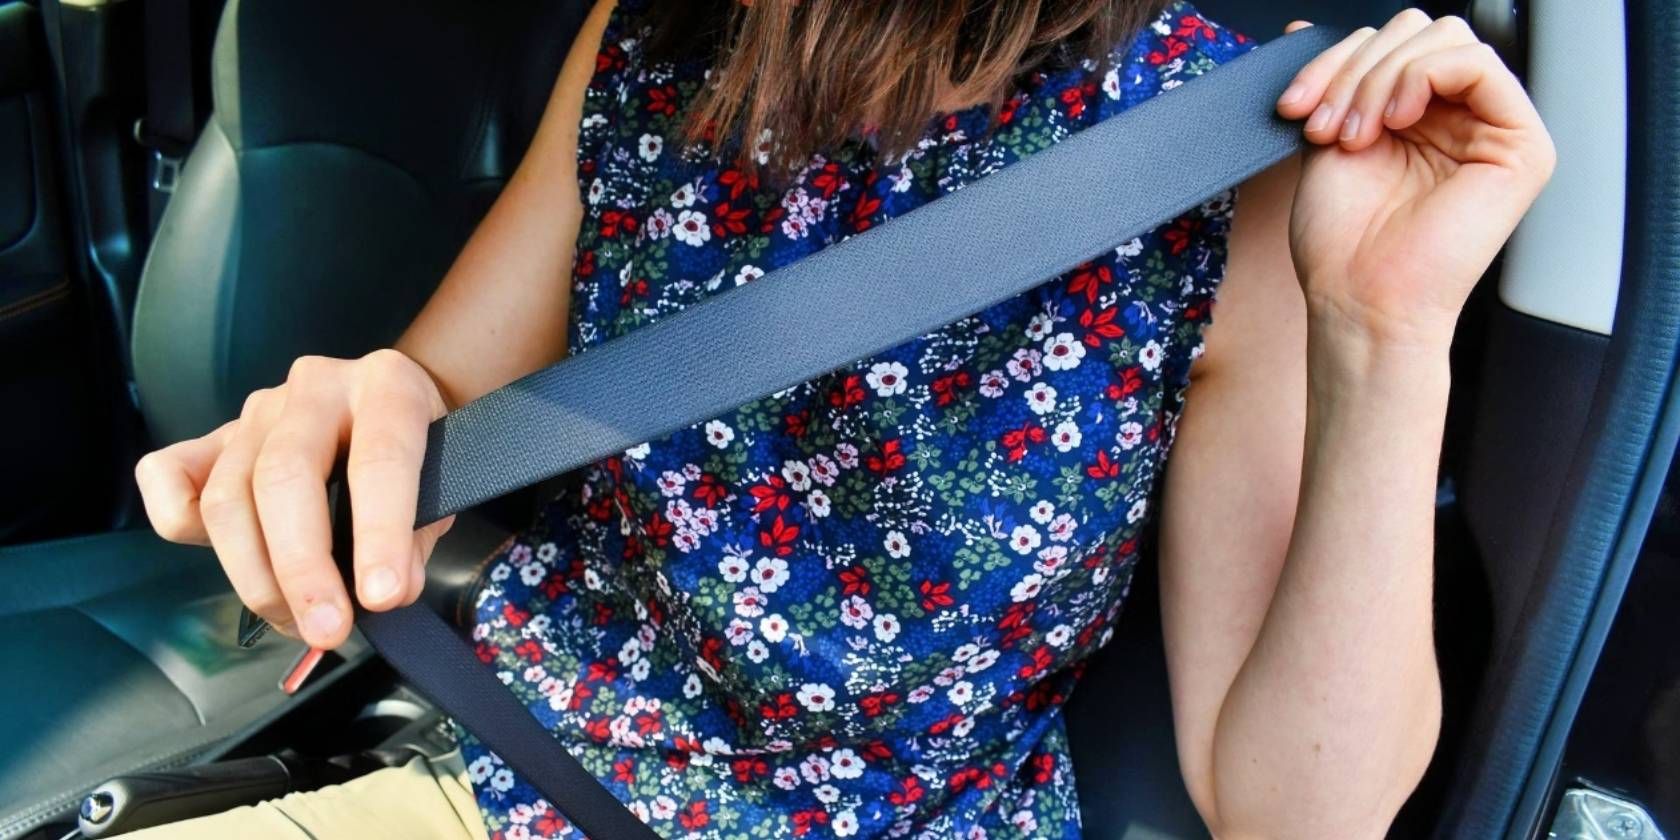 A woman putting on a seat belt in a vehicle